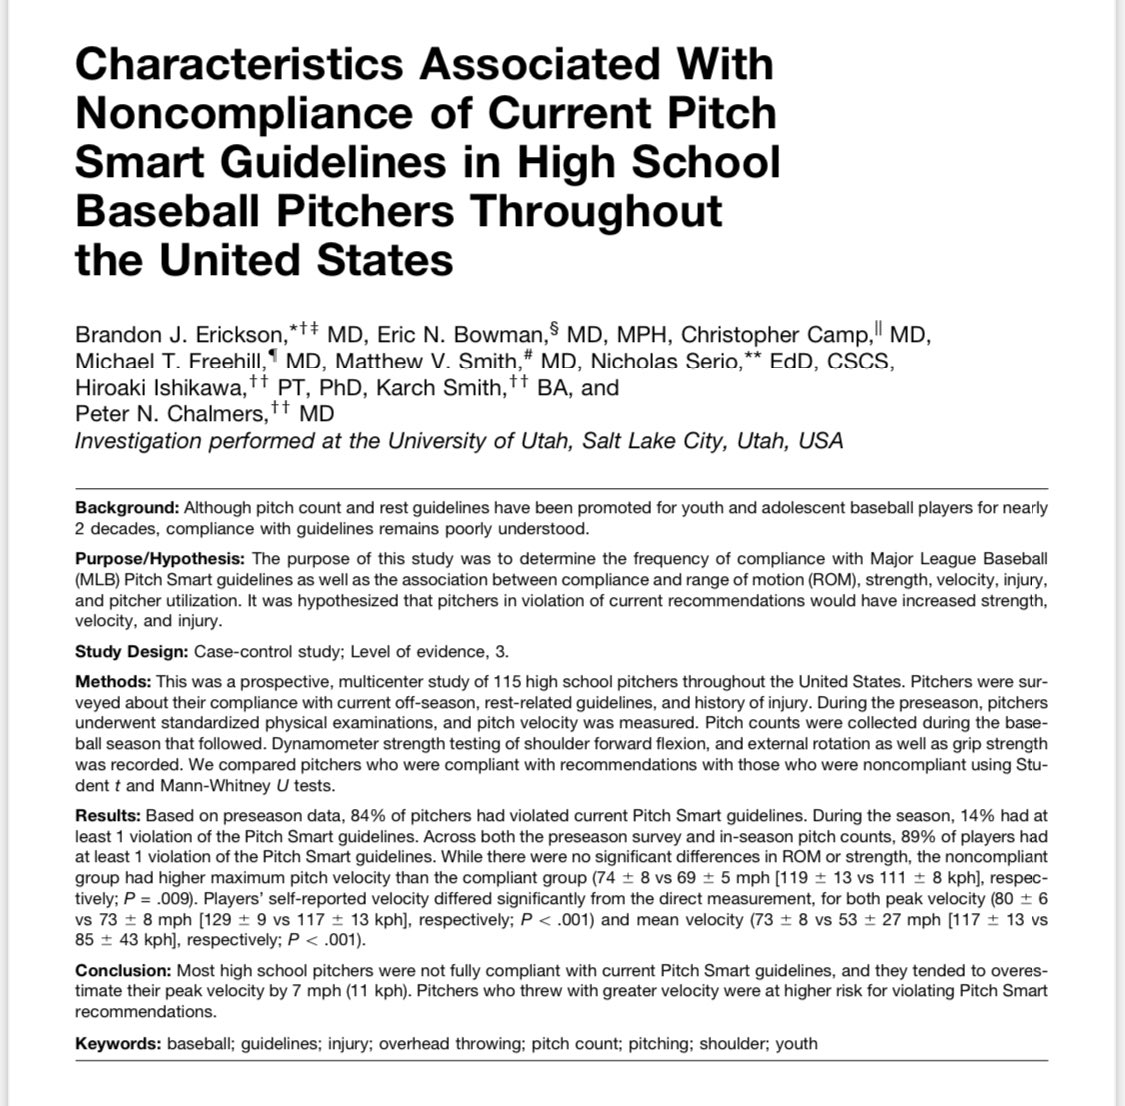 New @OJSM_SportsMed study on pitch guidelines in HS athletes: ▫️89% violated @MLBPitchSmart guidelines ▫️Pitchers w/ ⬆️ velo more likely to violate 🔑: These both ⬆️ risk for injury and are likely compounding one another tinyurl.com/mweywkcr @EricBowmanMD #SaveTheElbows